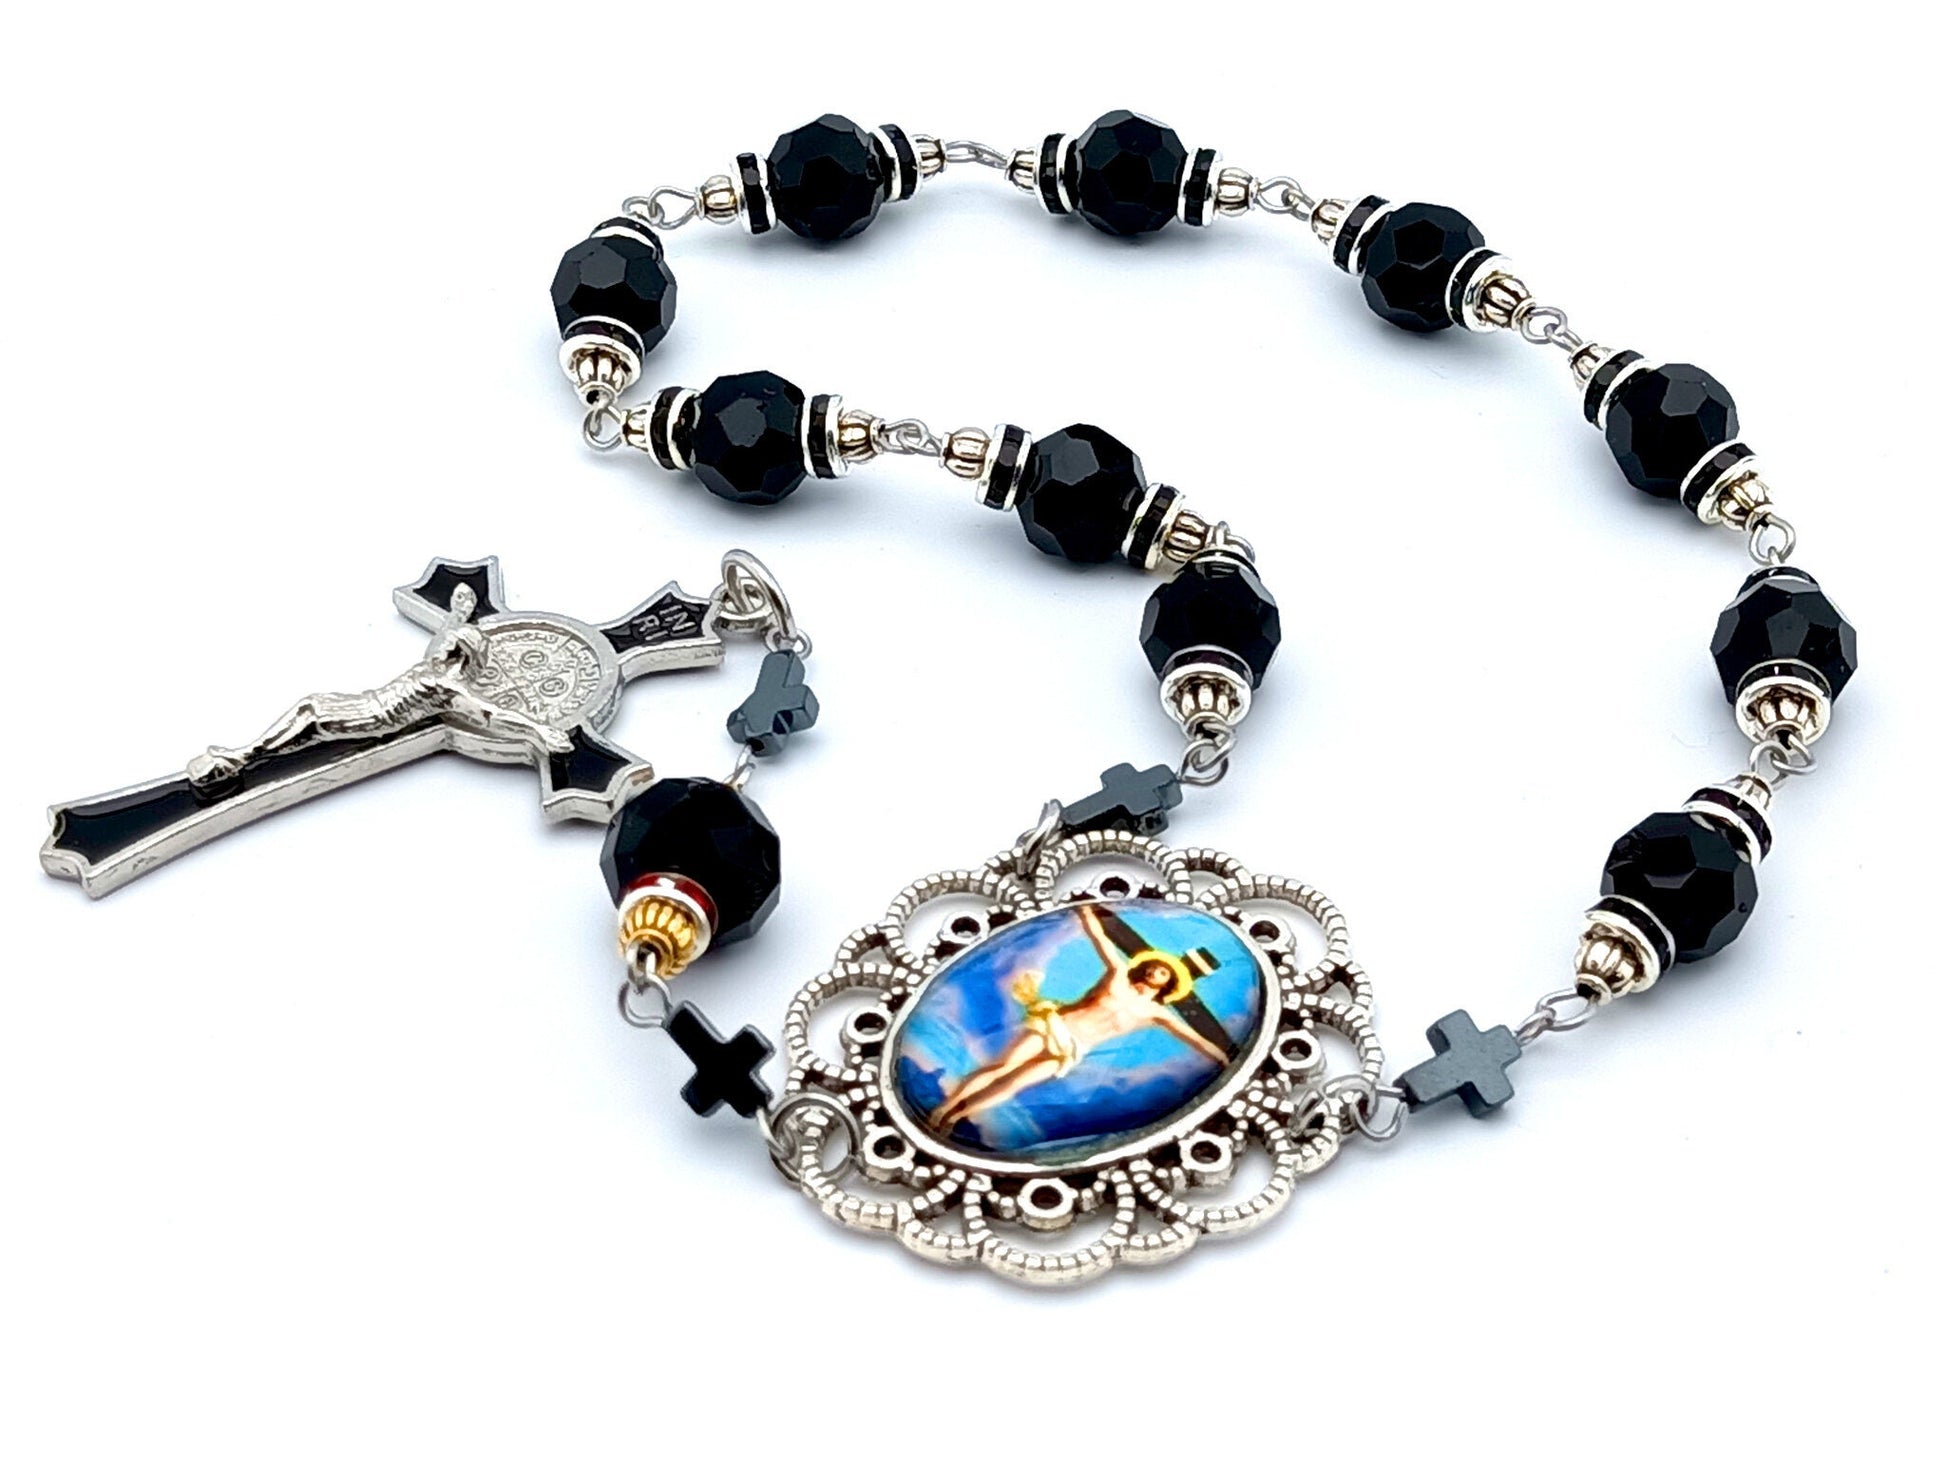 The Crucifixion unique rosary beads single decade rosary with black faceted glass beads, black enamel crucifix and silver picture centre medal.